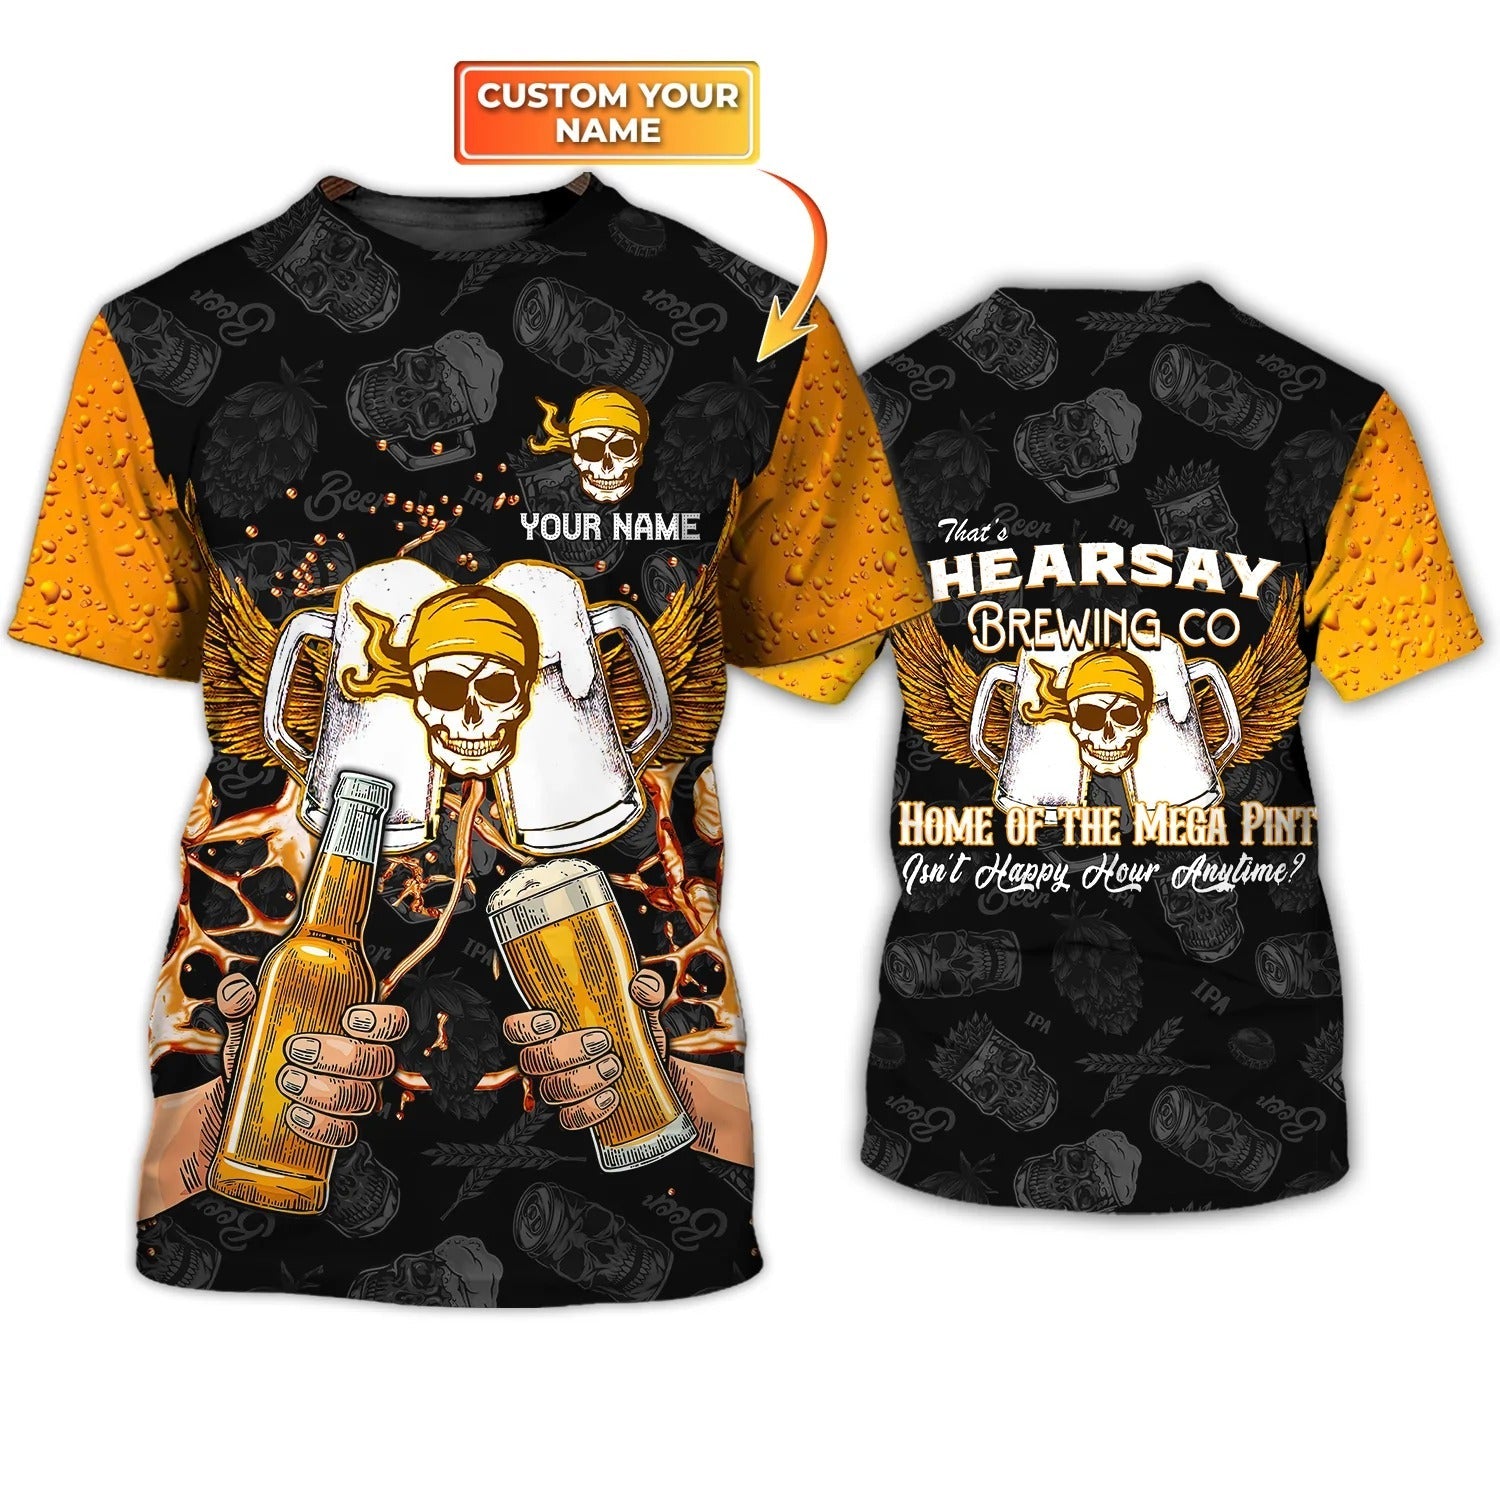 Personalized Hearsay Brewing Co T Shirt Home Of The Mega Pint Skull And Beer Shirts